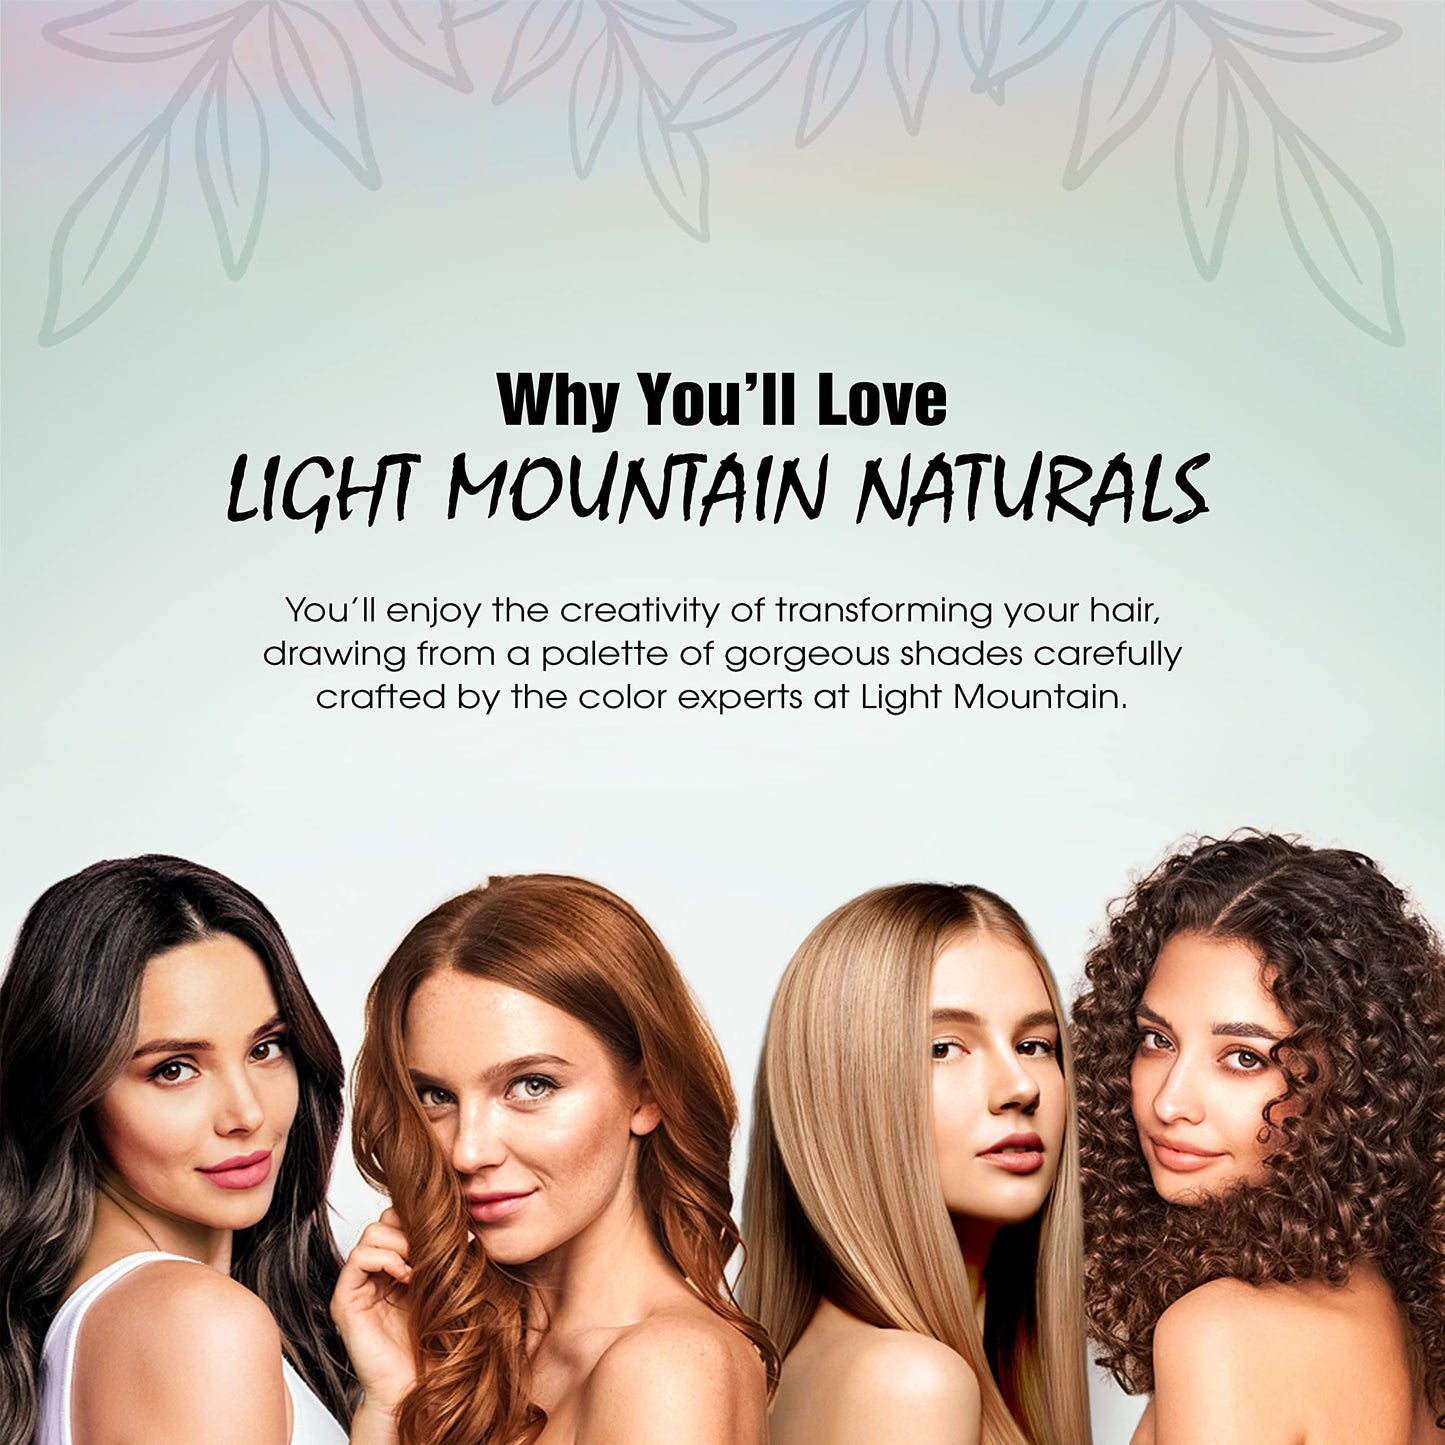 Light Mountain Henna Hair Color & Conditioner - Red Hair Dye for Men/Women, Organic Henna Leaf Powder and Botanicals, Chemical-Free, Semi-Permanent Hair Color, 4 Oz